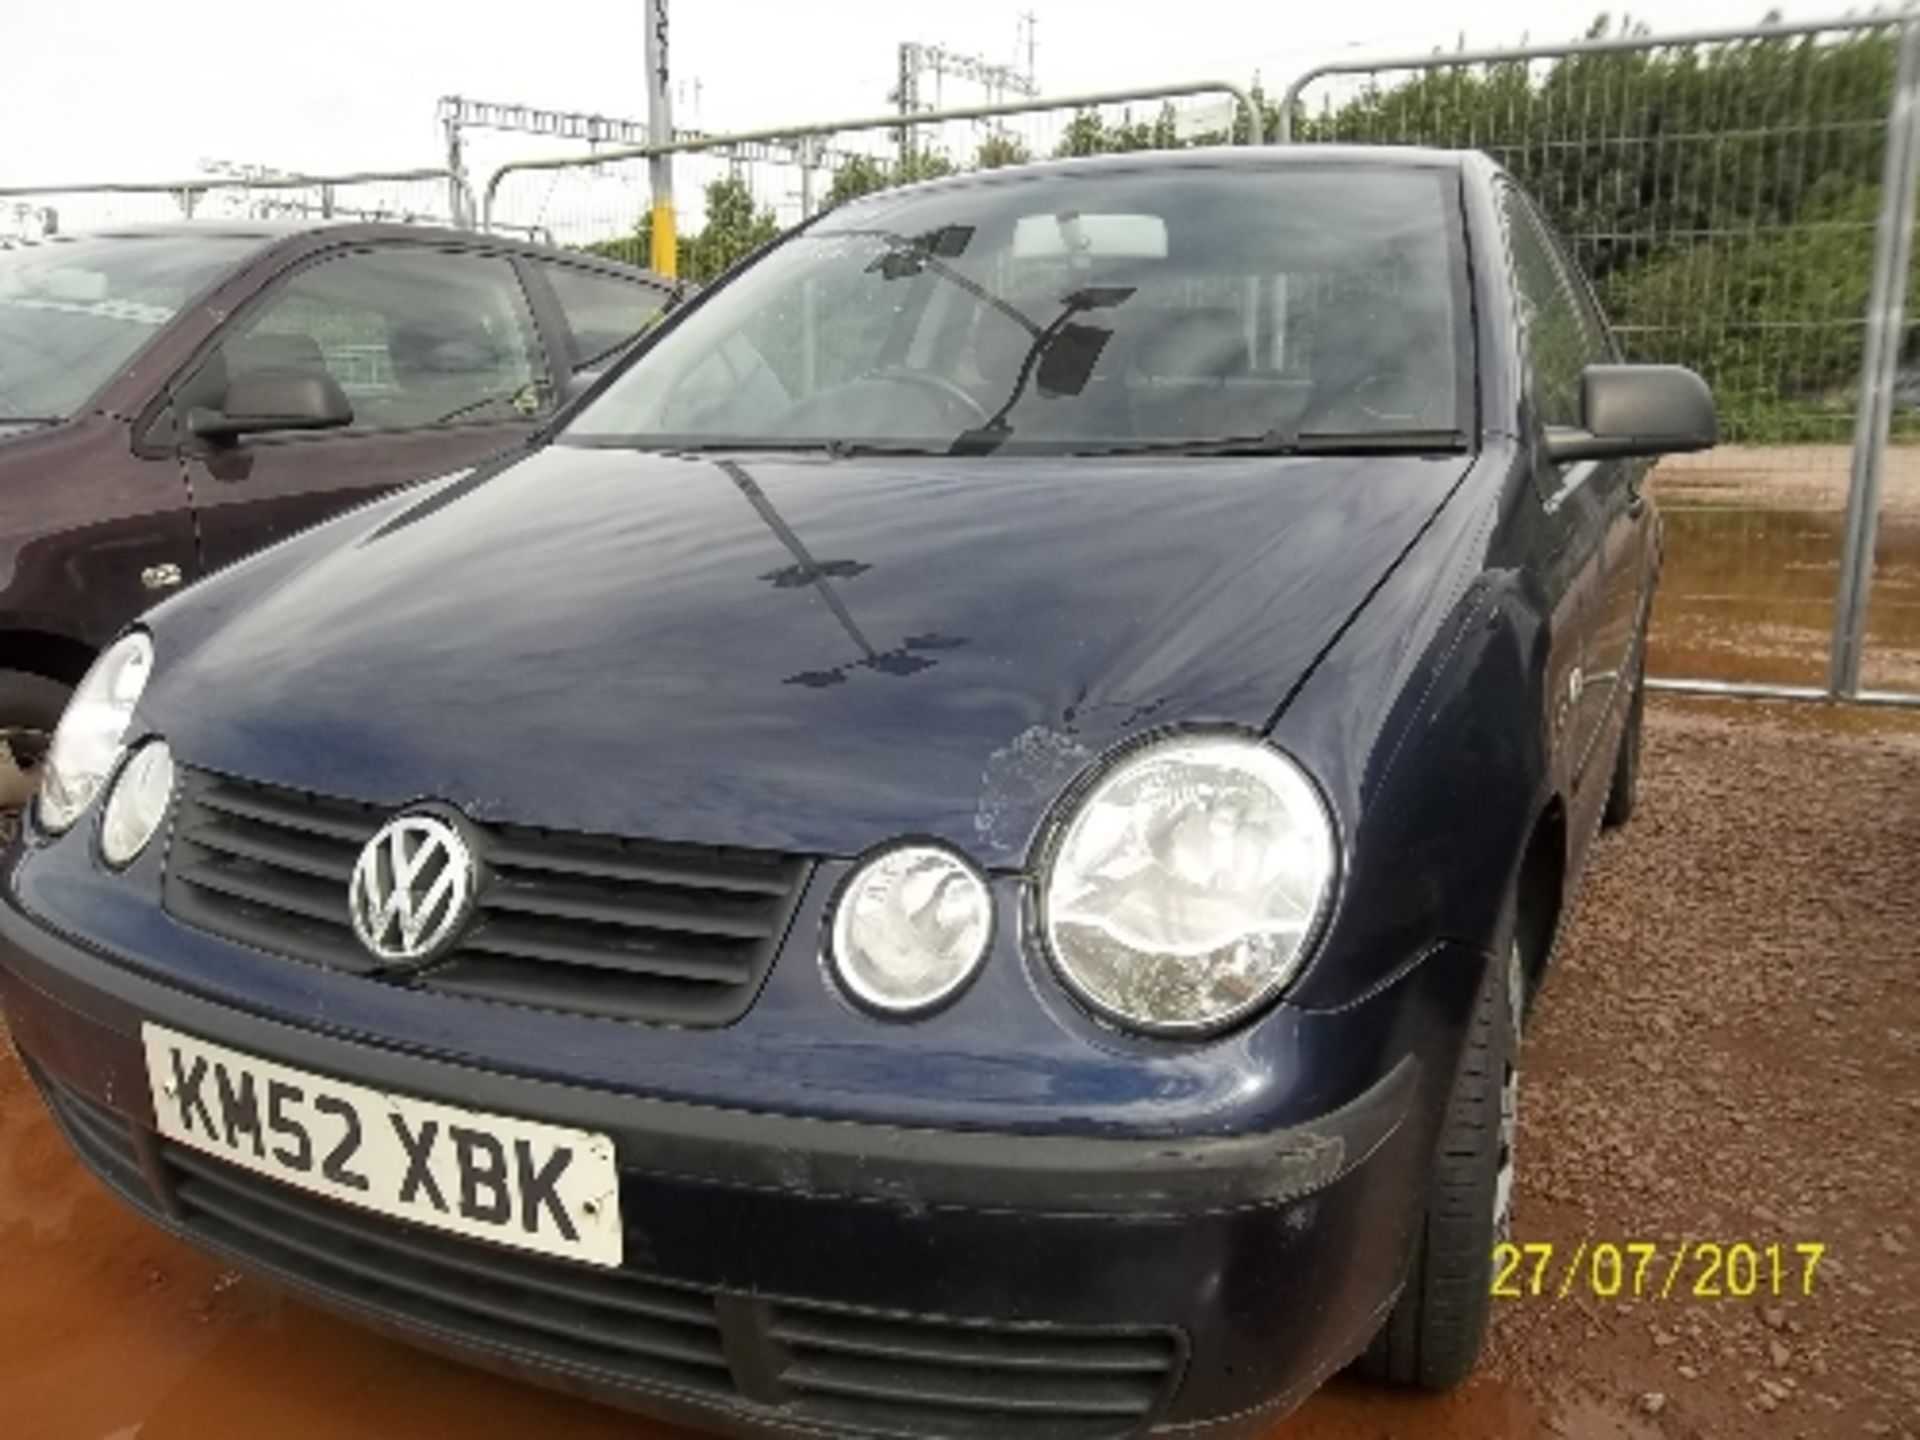 Volkswagen Polo S - KM52 XBK Date of registration: 12.12.2002 1390cc, petrol, 4 speed auto, blue - Image 2 of 4